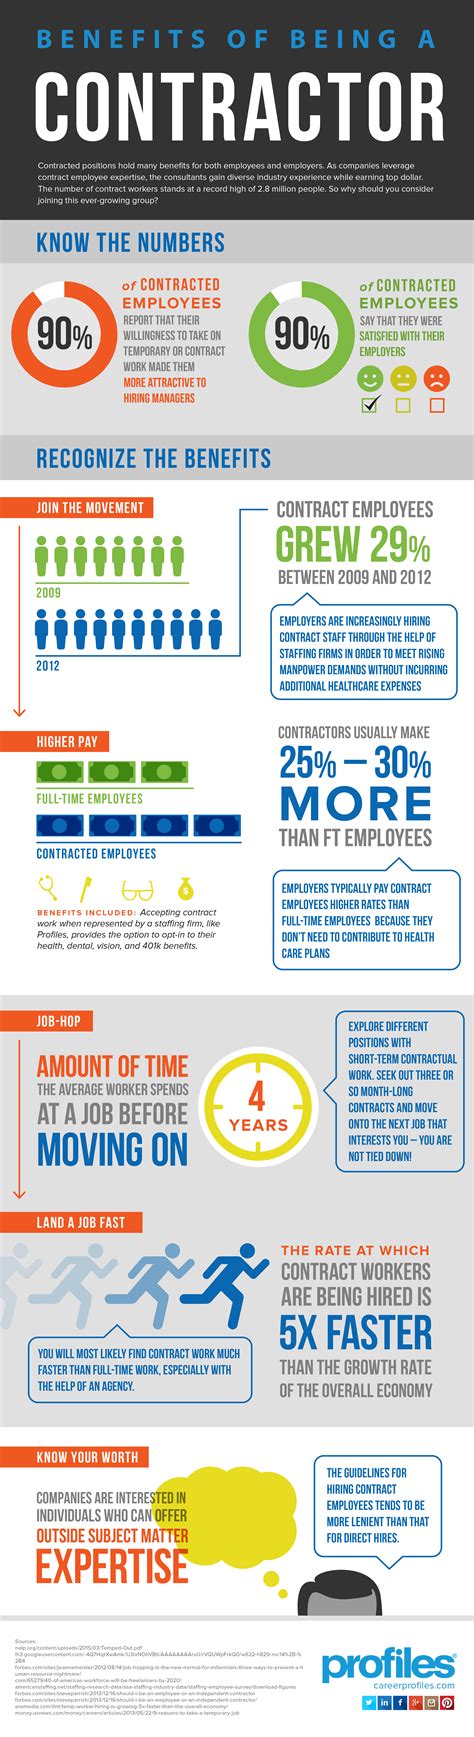 Benefits Of Being A Contractor Infographic Profiles